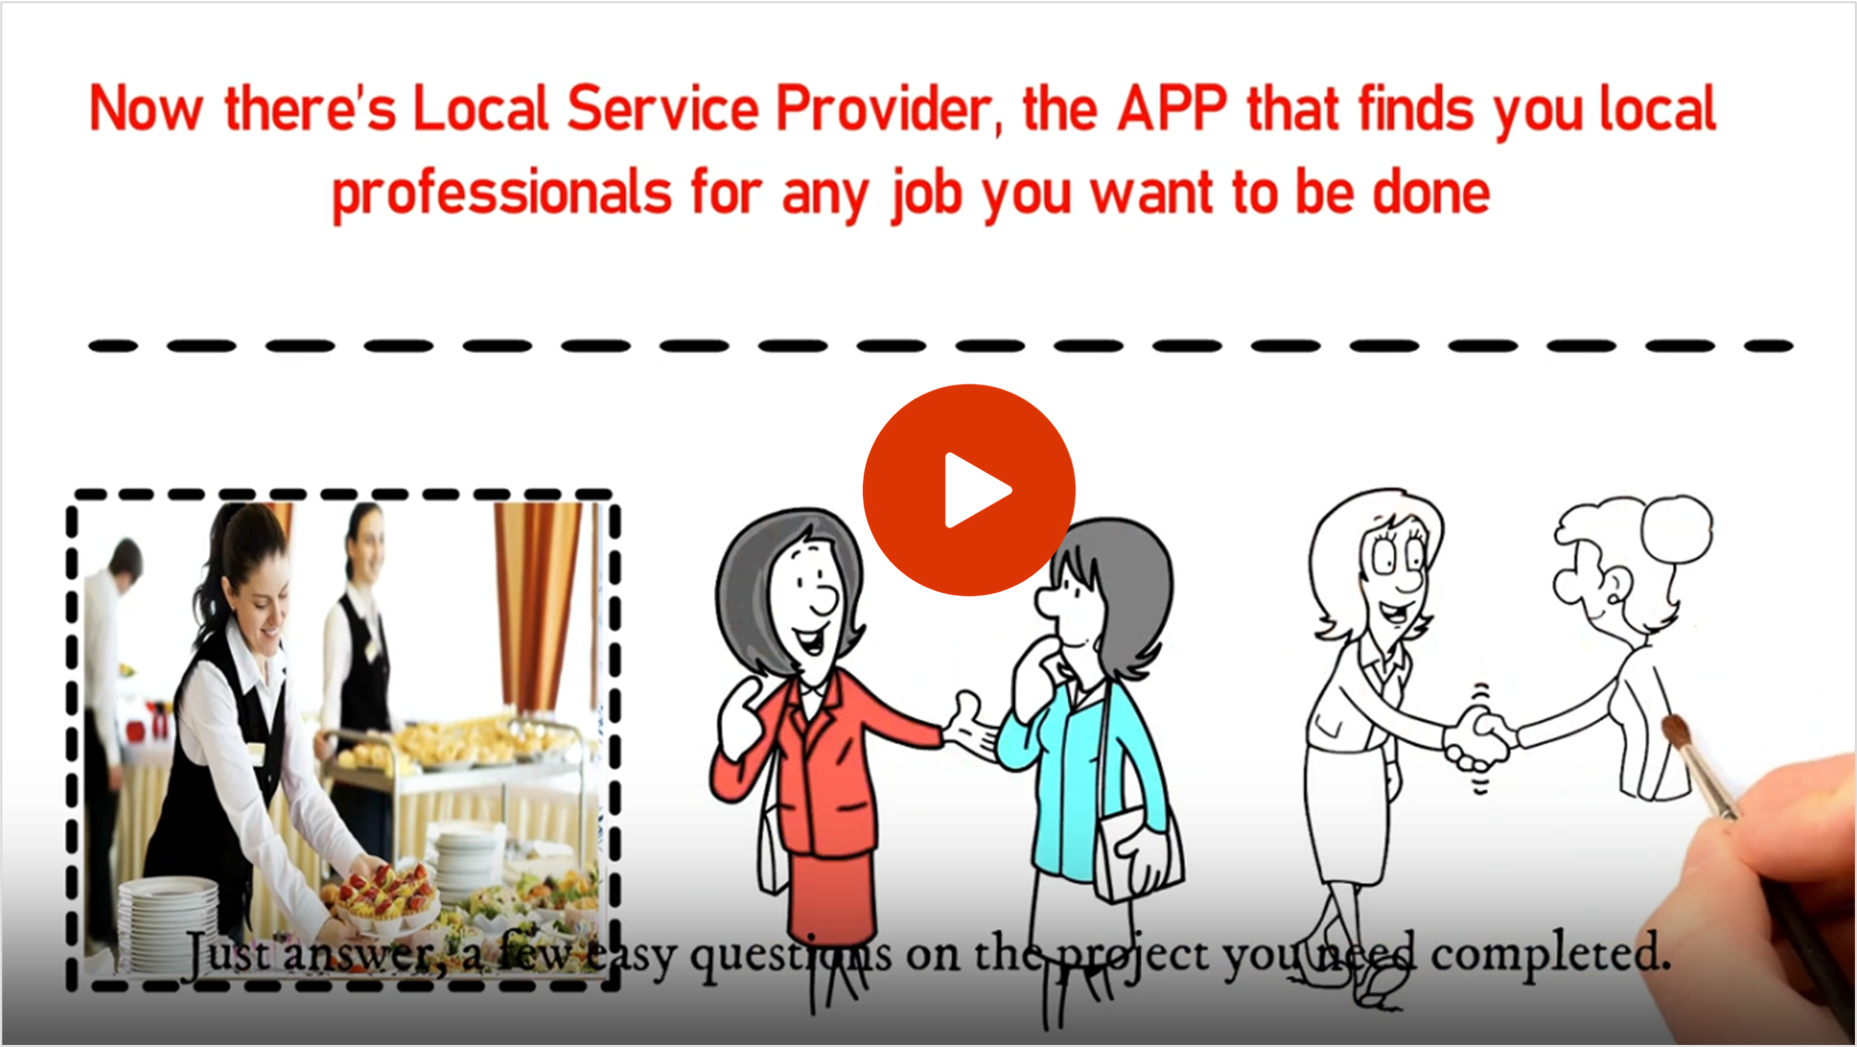 Professional Service Provider Marketplace in ASP.NET - 3